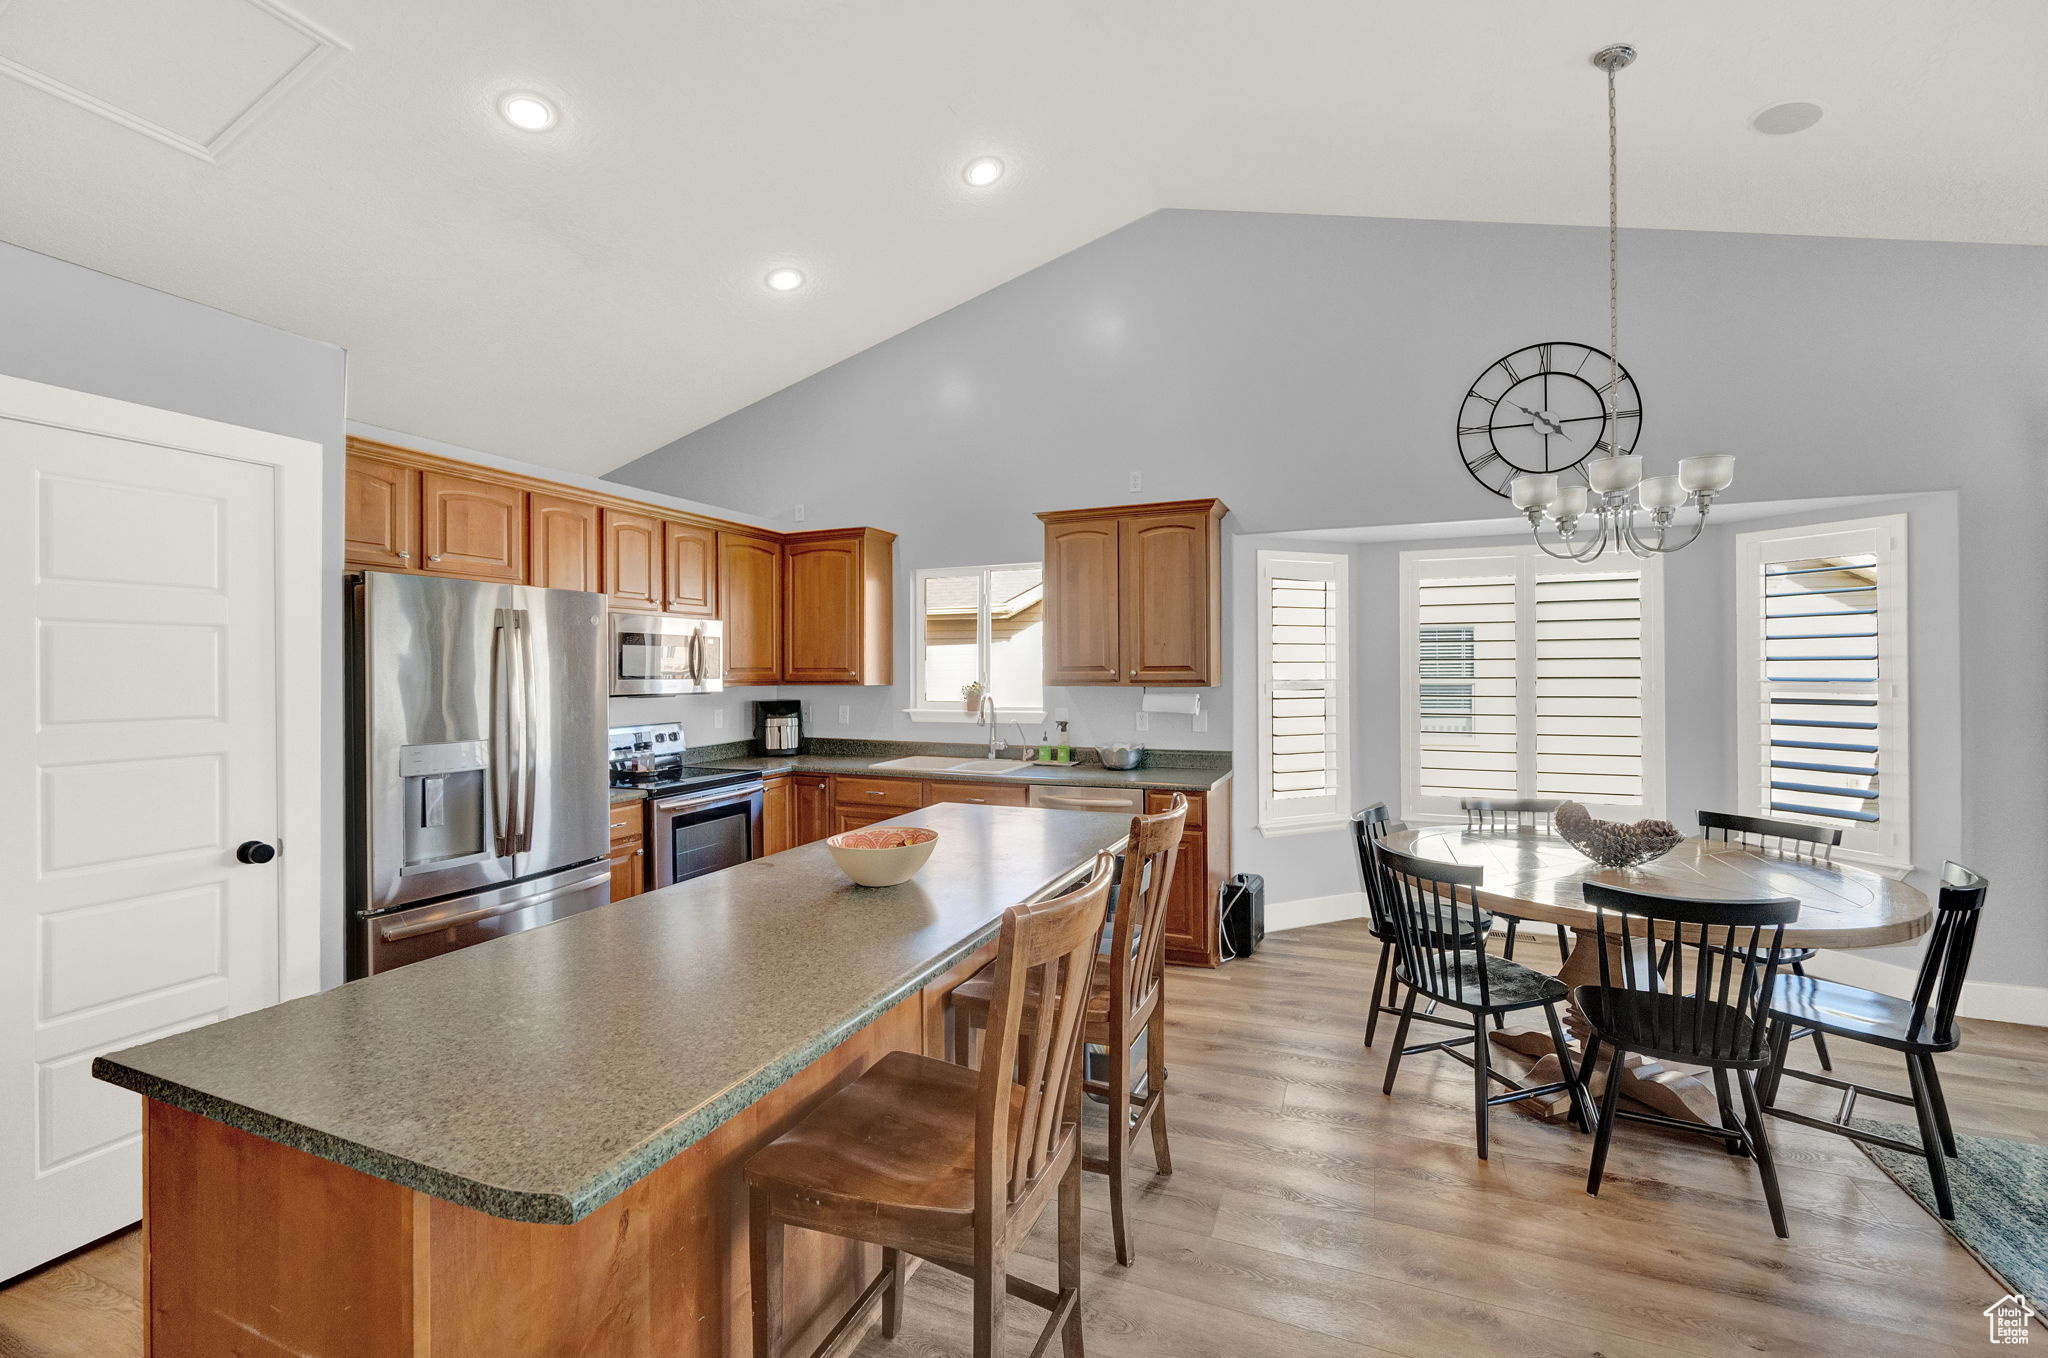 Kitchen featuring high vaulted ceiling, light hardwood / wood-style flooring, a chandelier, stainless steel appliances, and a kitchen island